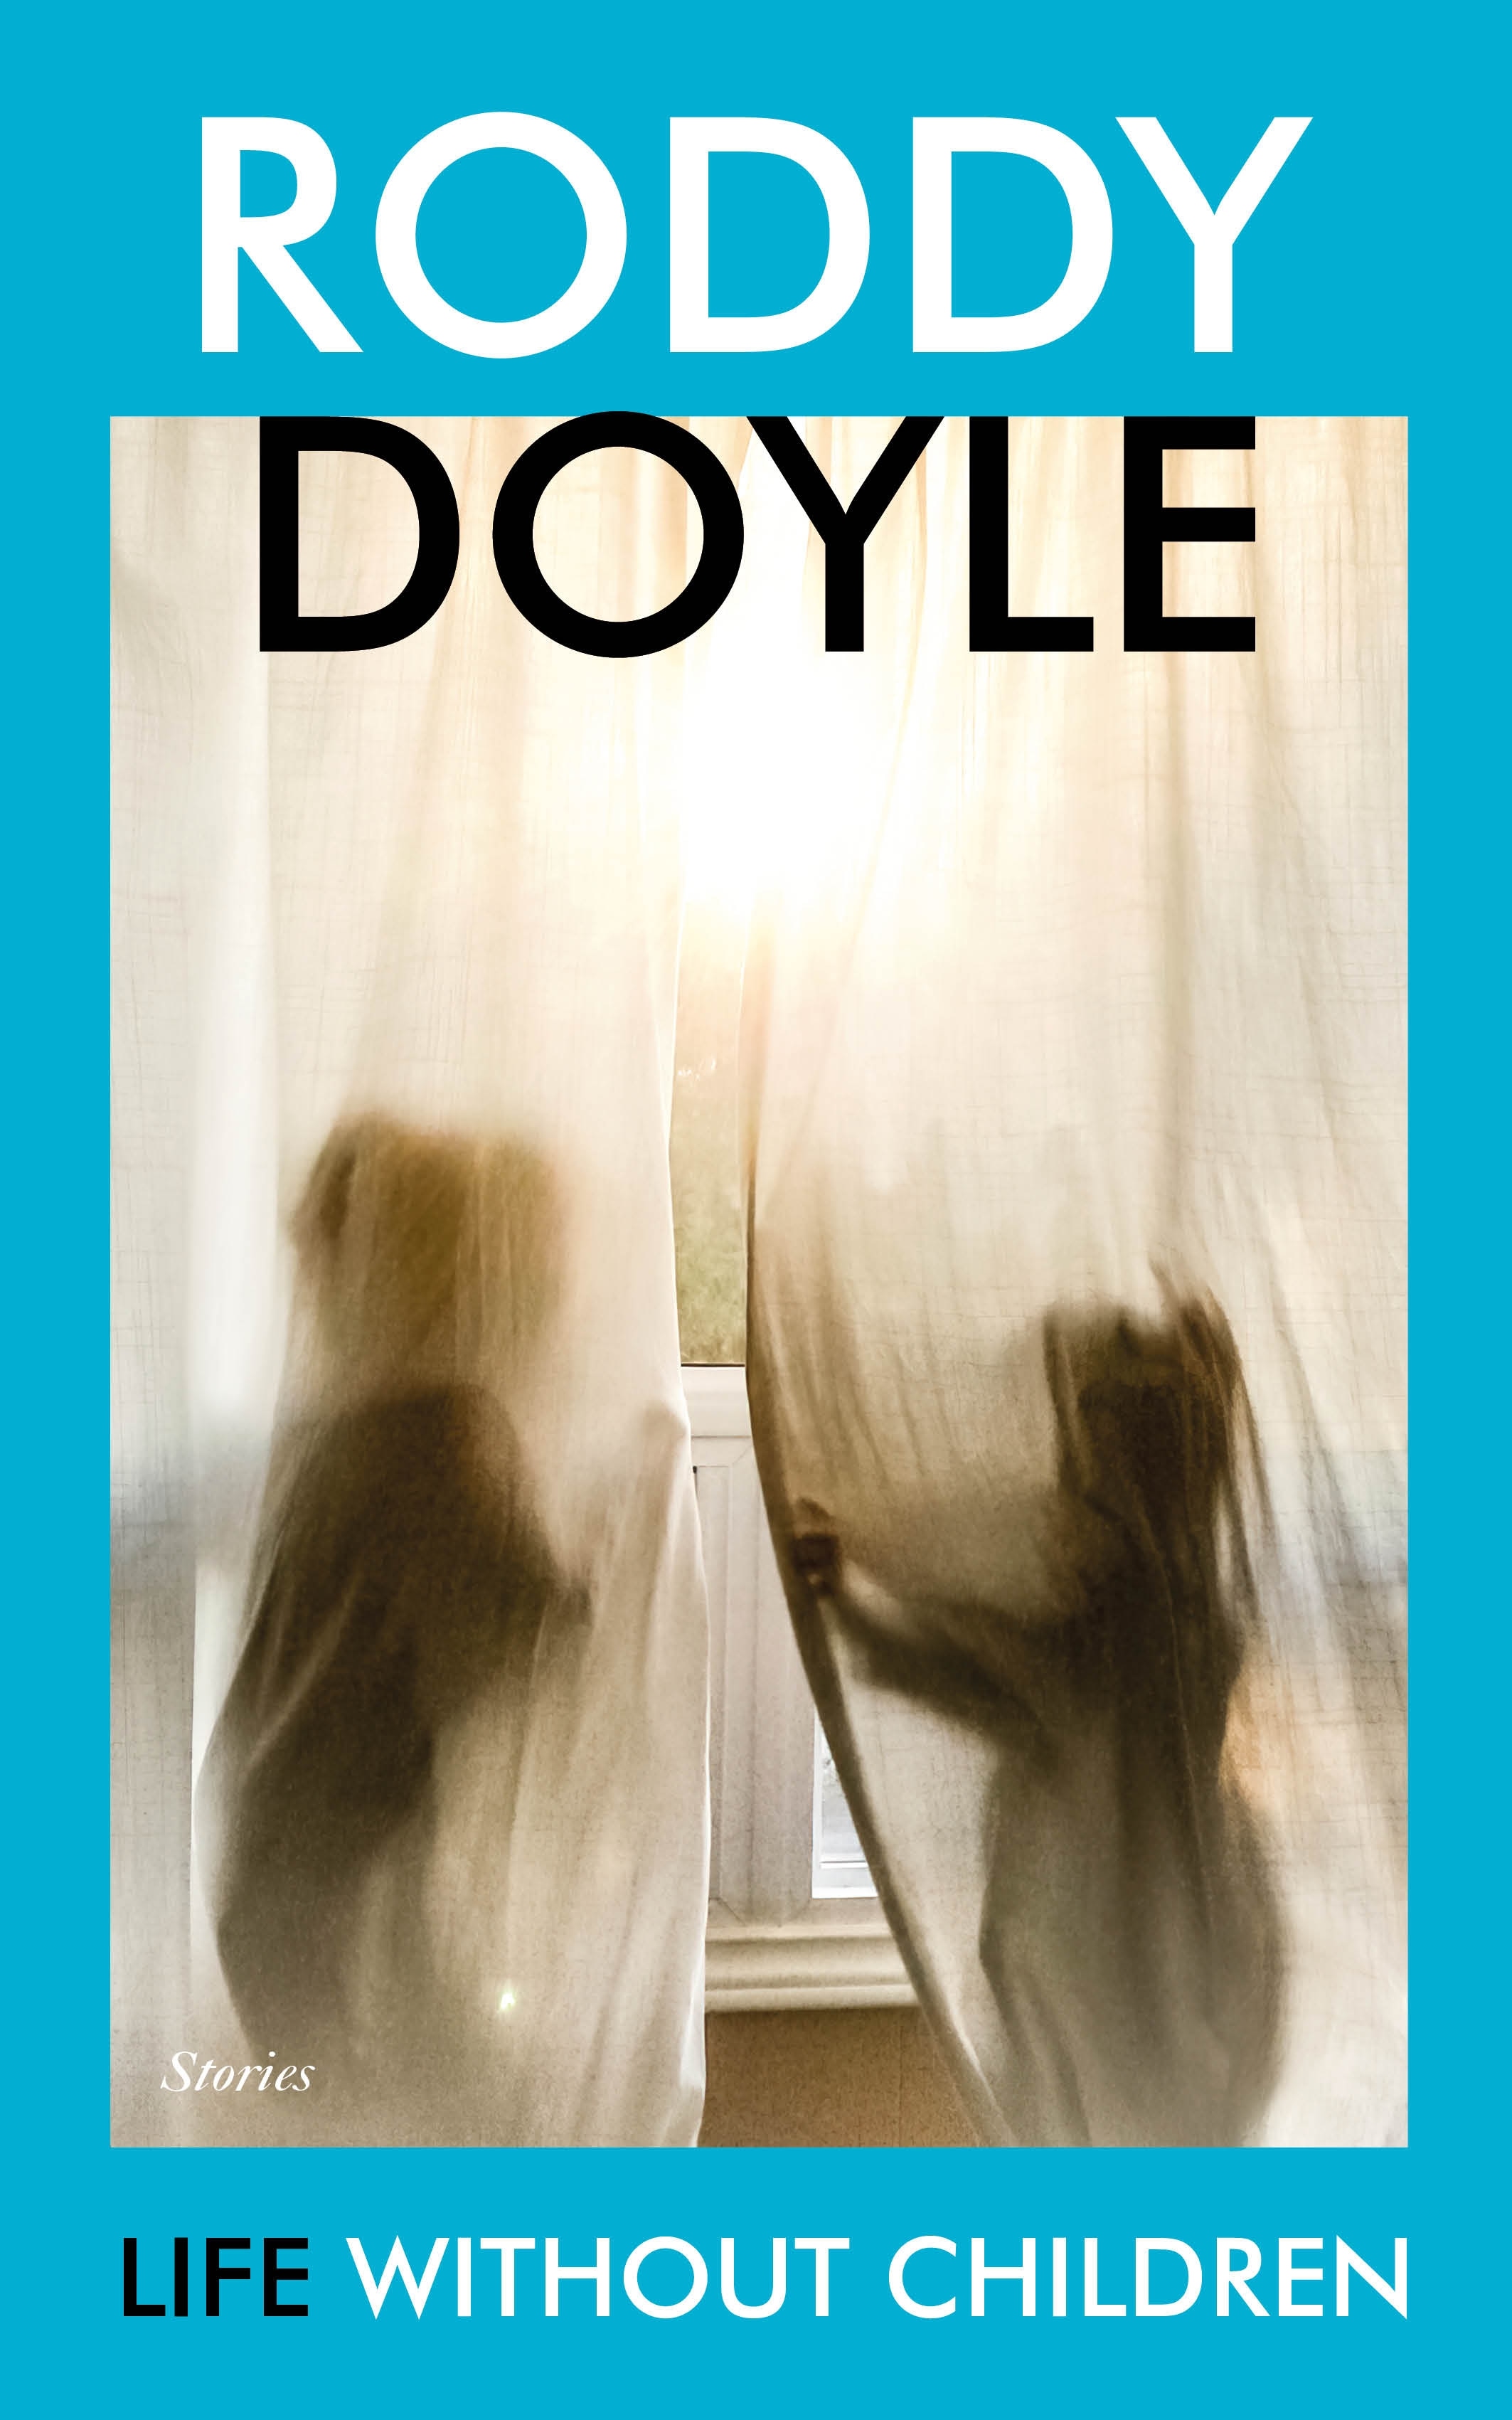 Book “Life Without Children” by Roddy Doyle — October 7, 2021